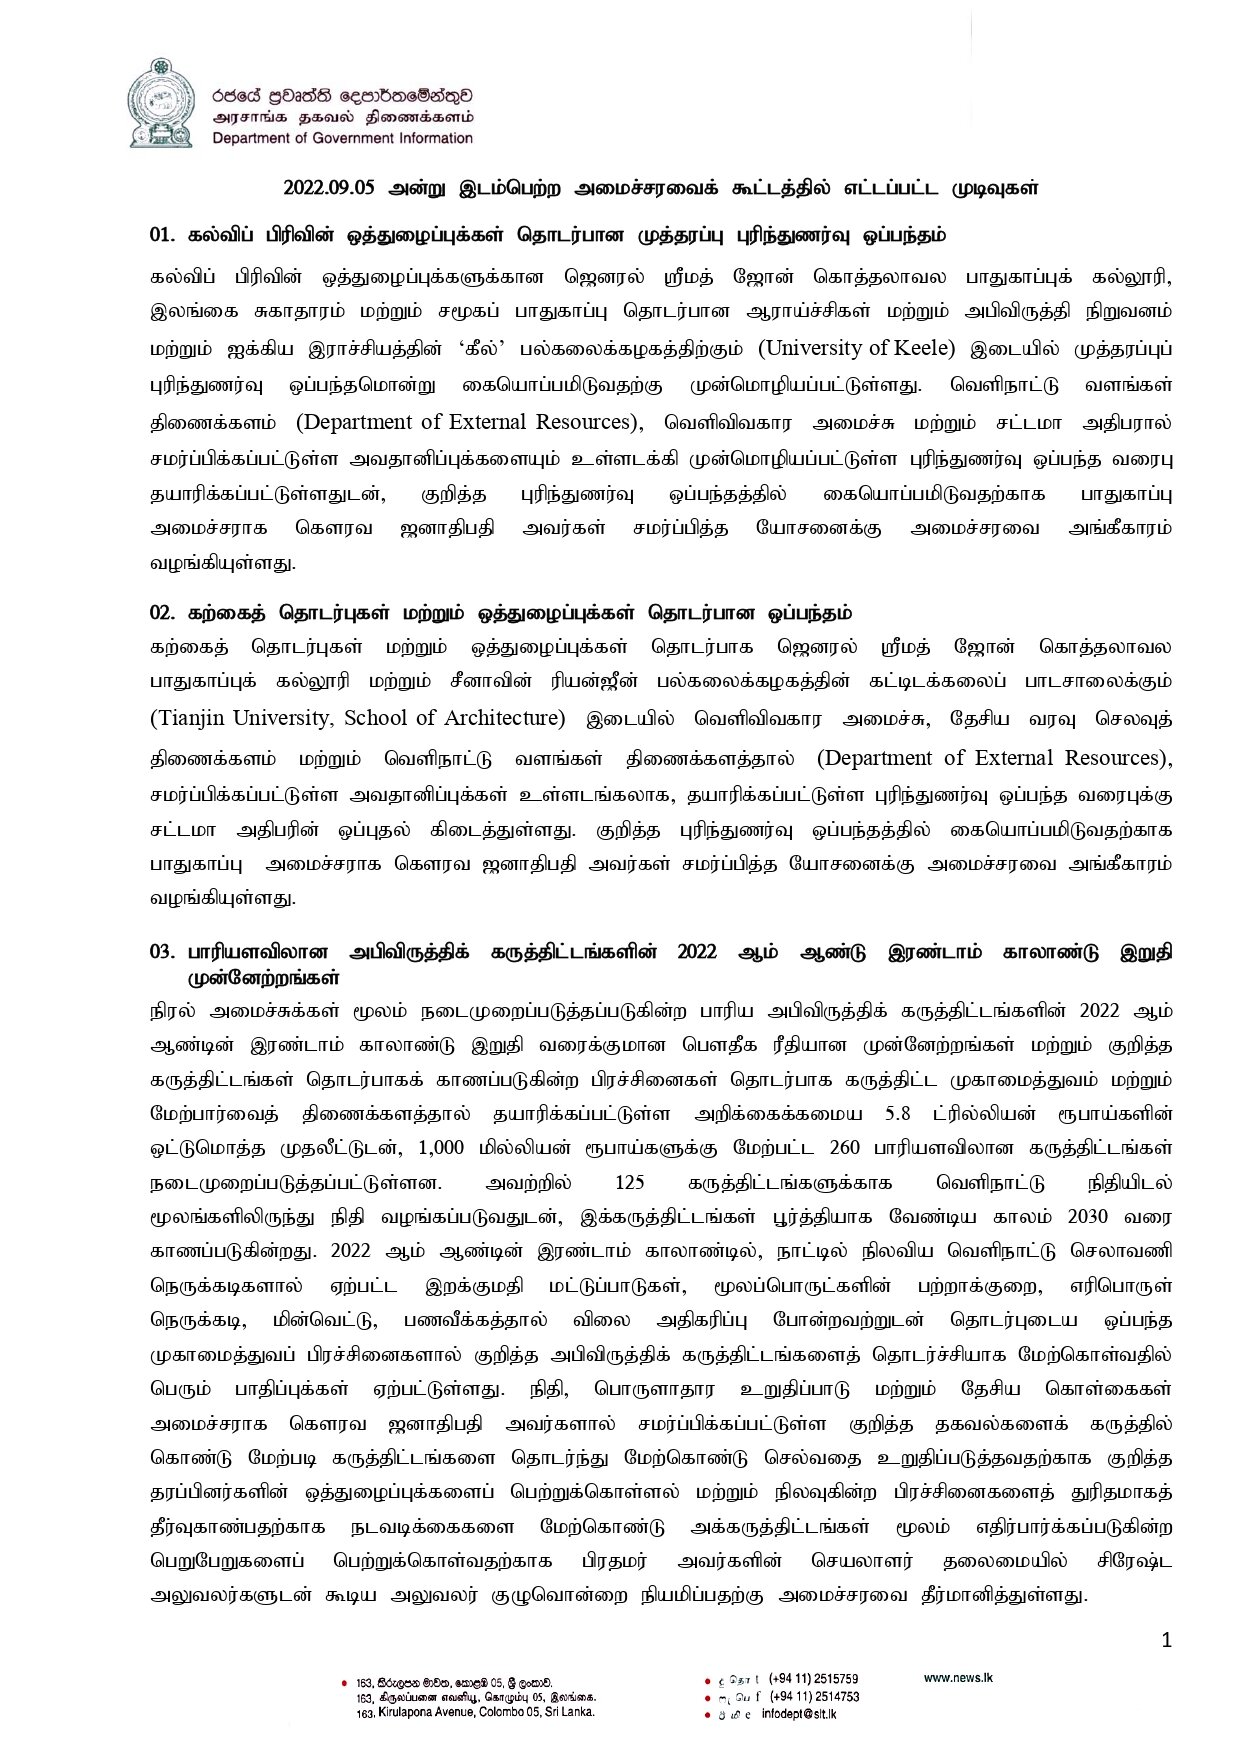 Cabinet Decisions on 05.09.2022 Tamil page 0001